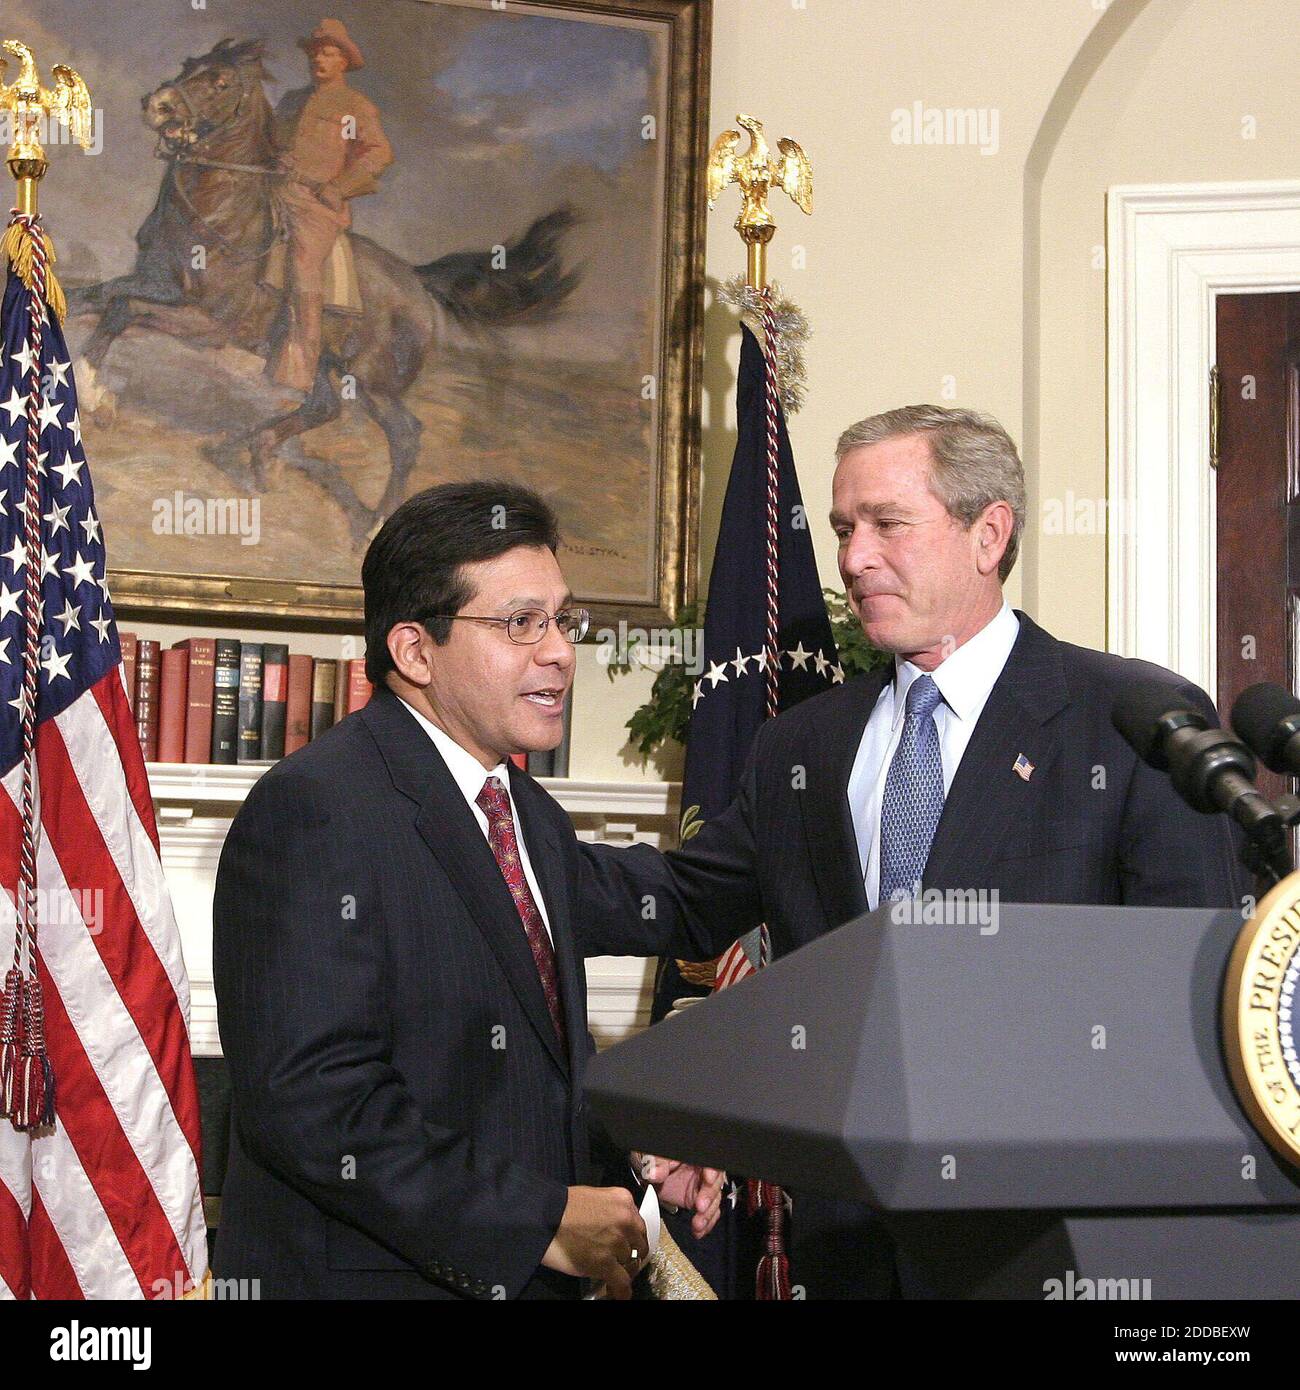 NO FILM, NO VIDEO, NO TV, NO DOCUMENTARY - White Counsel Alberto Gonzales, left, joins President George W. Bush, right, in a statement to the media after being nominated to fill the spot of U.S. Attorney General to replace John Ashcroft. Photo by Chuck Kennedy/KRT/ABACA. Stock Photo